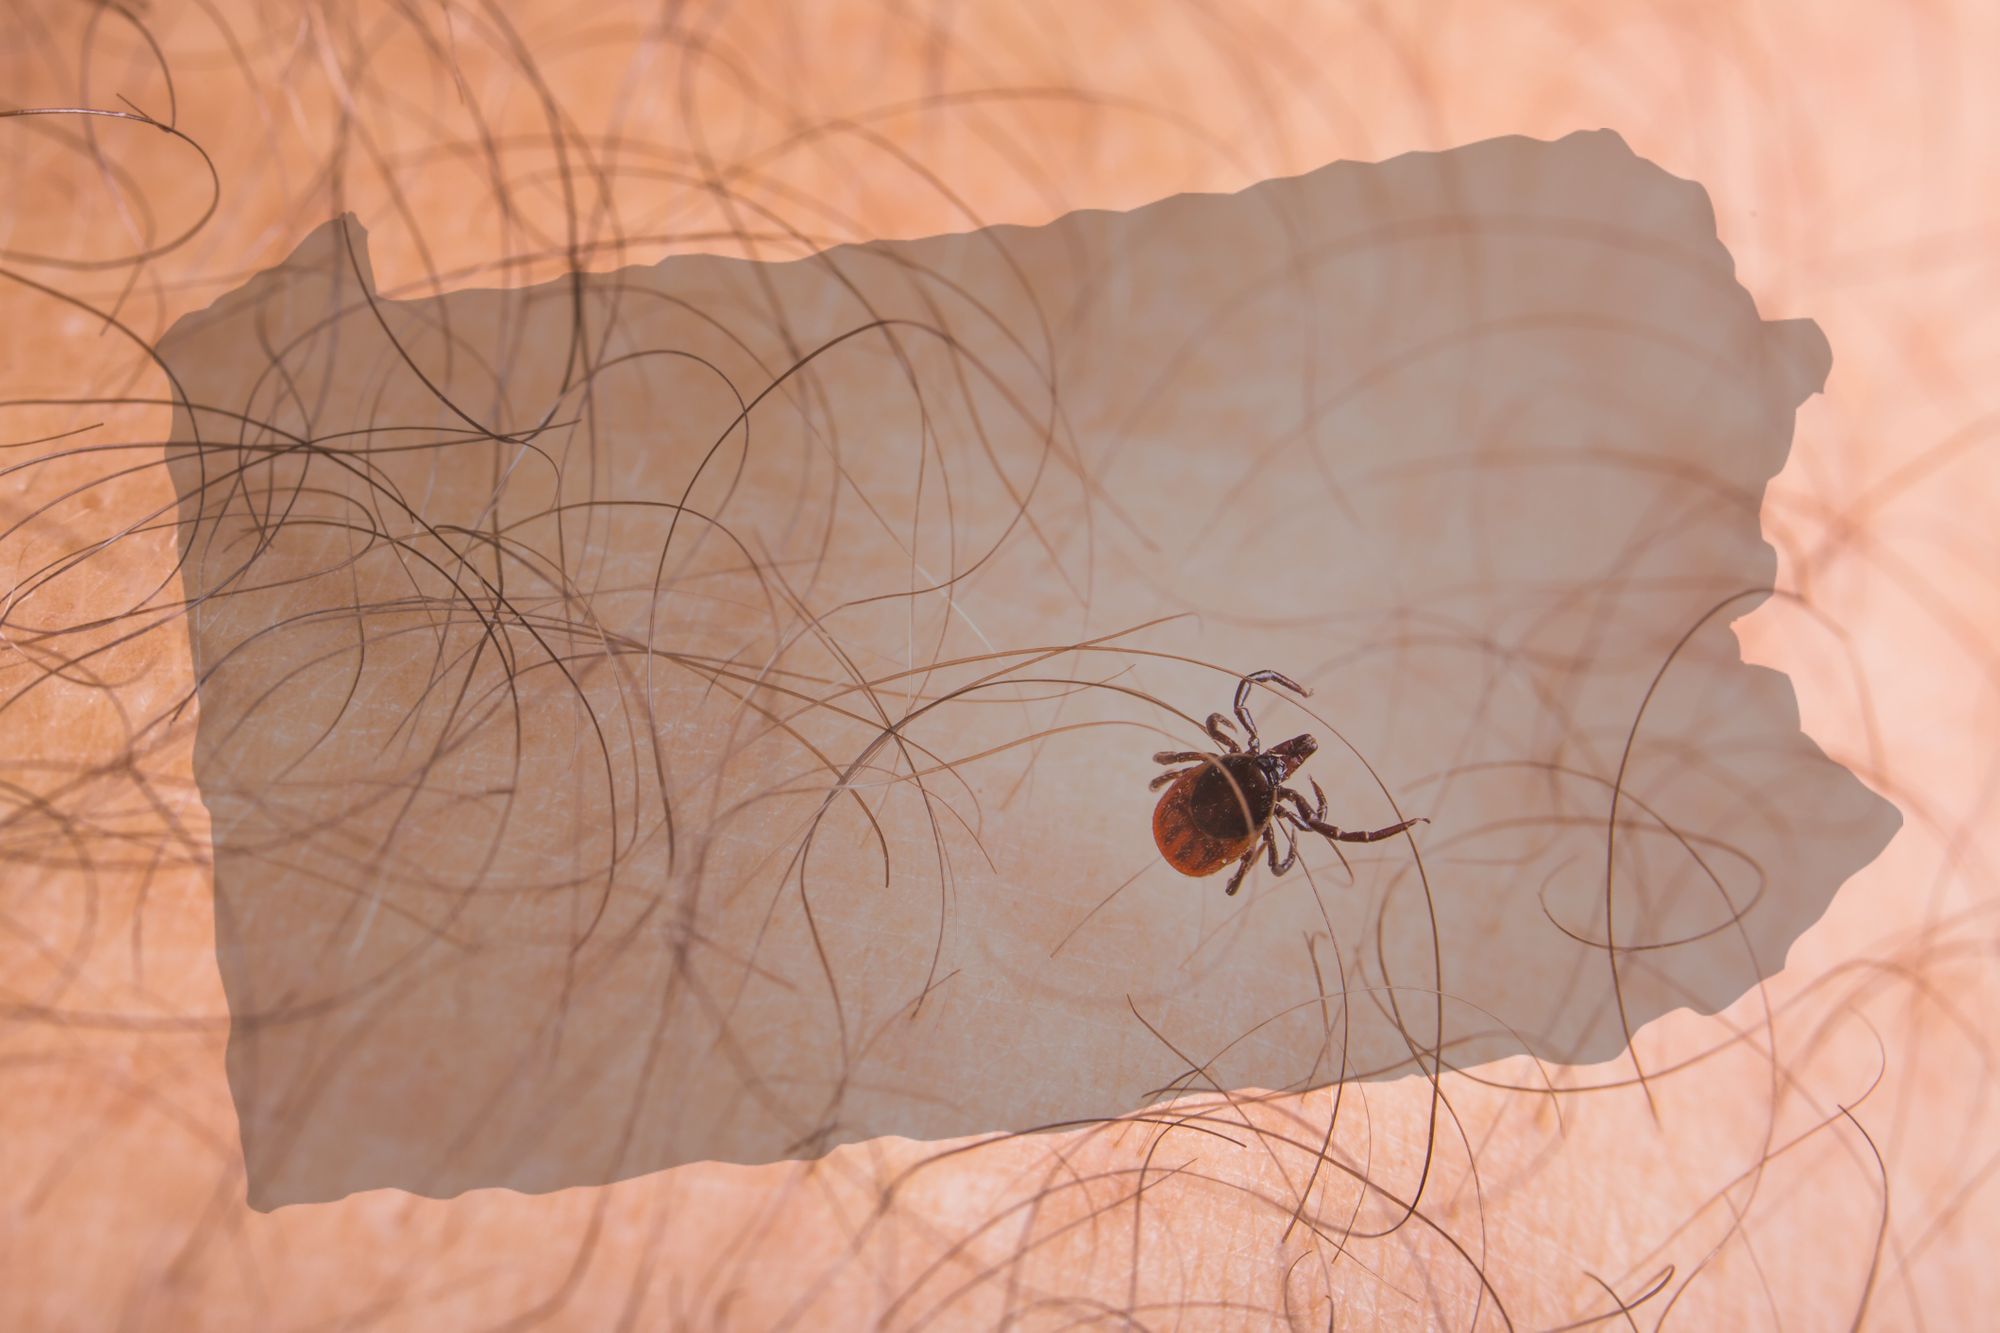 Are You Ready for Pennsylvania's Tick Explosion?